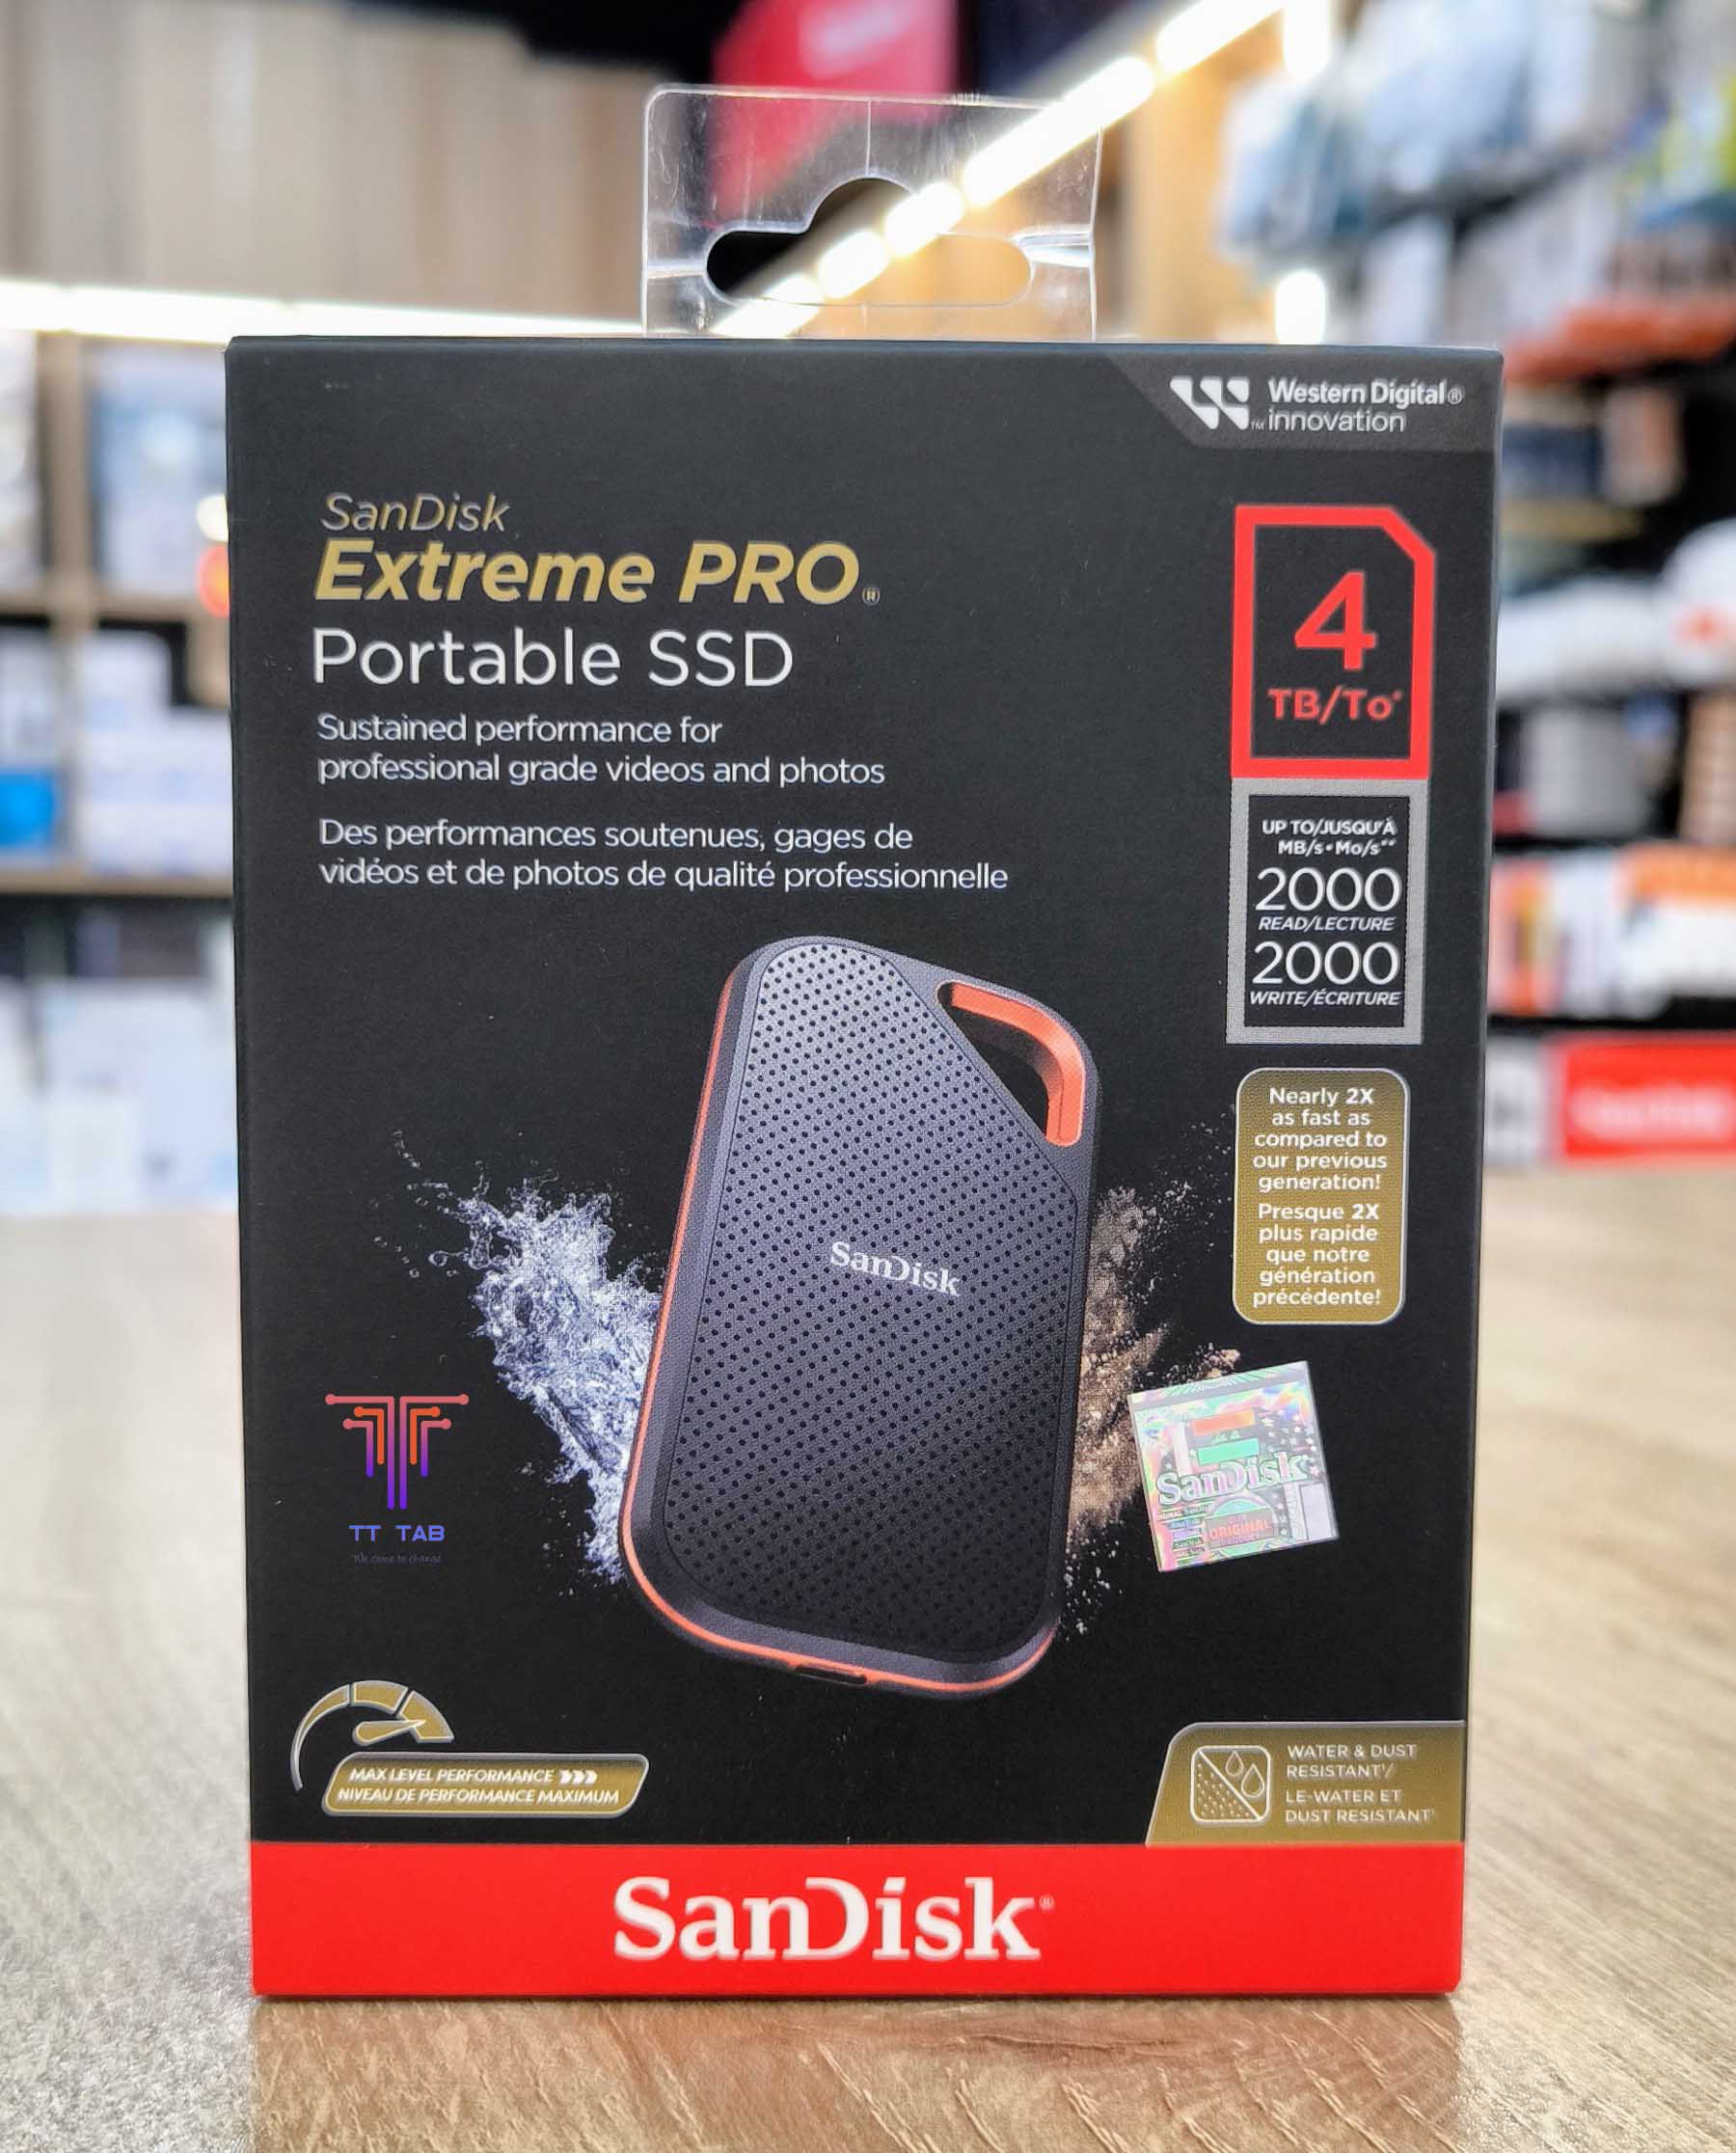 SanDisk Extreme Pro Portable SSD 2000MB/s